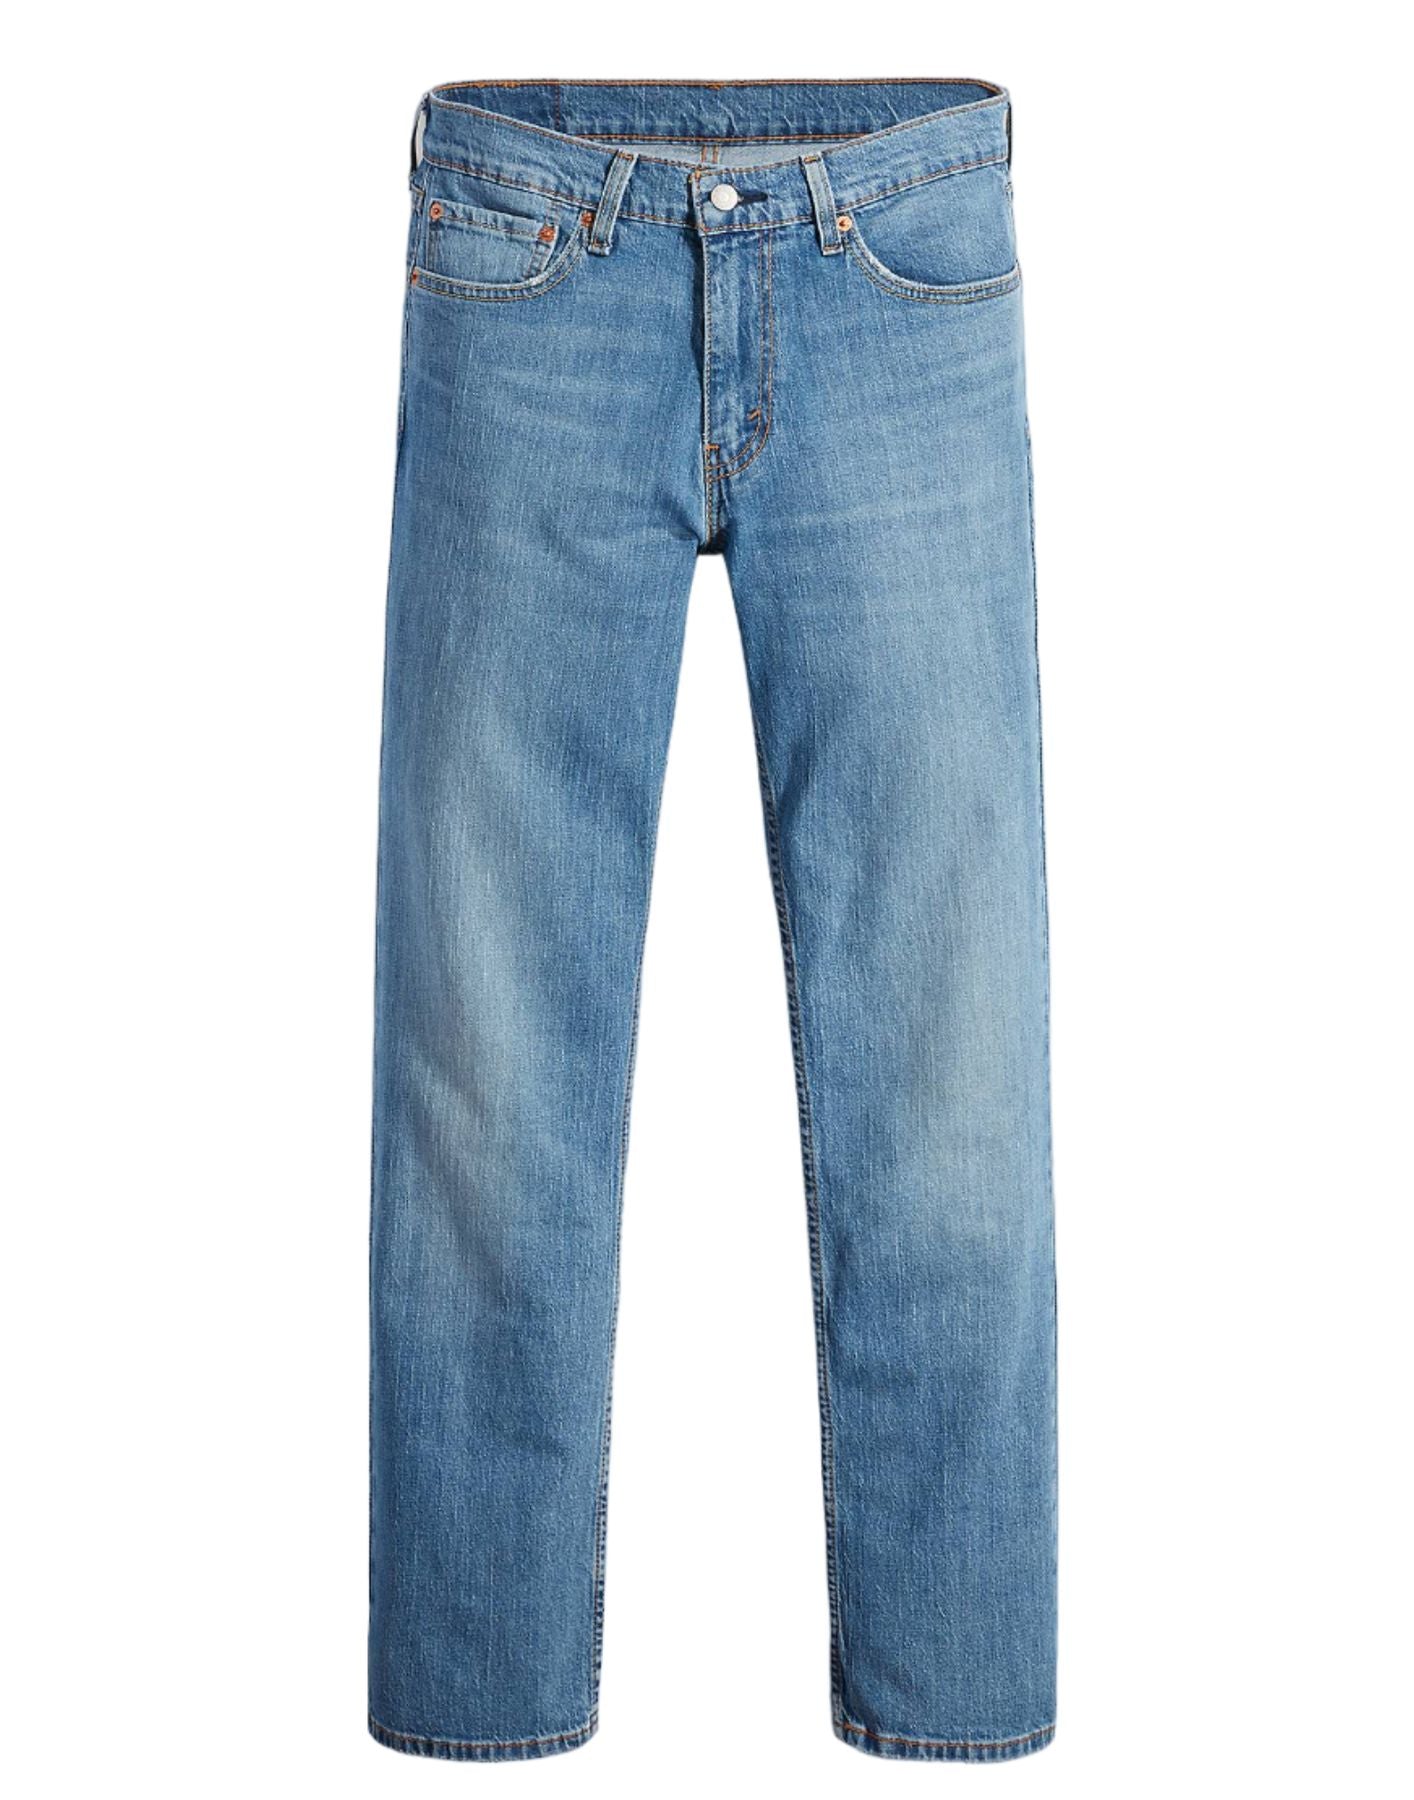 Jeans for man 045115646 MARK MY WORDS Levi's